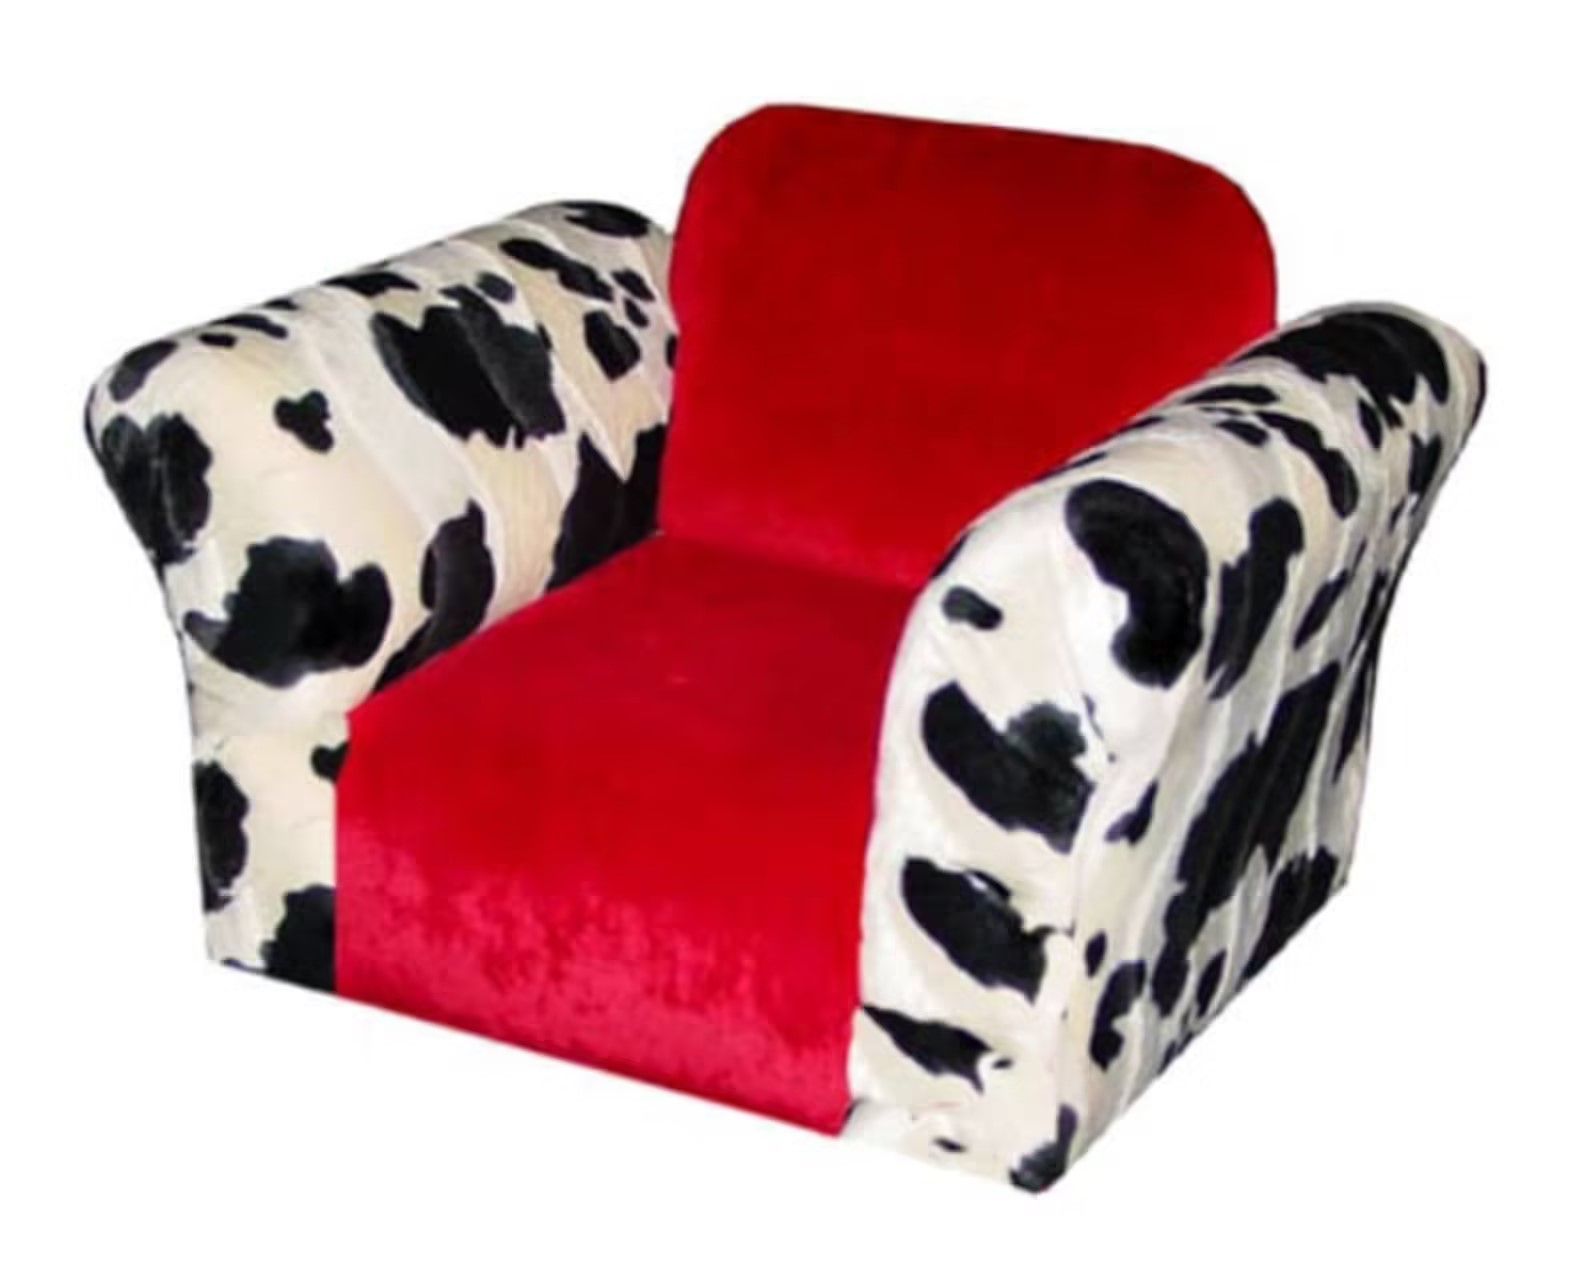 armchair with red seat and cow print arms